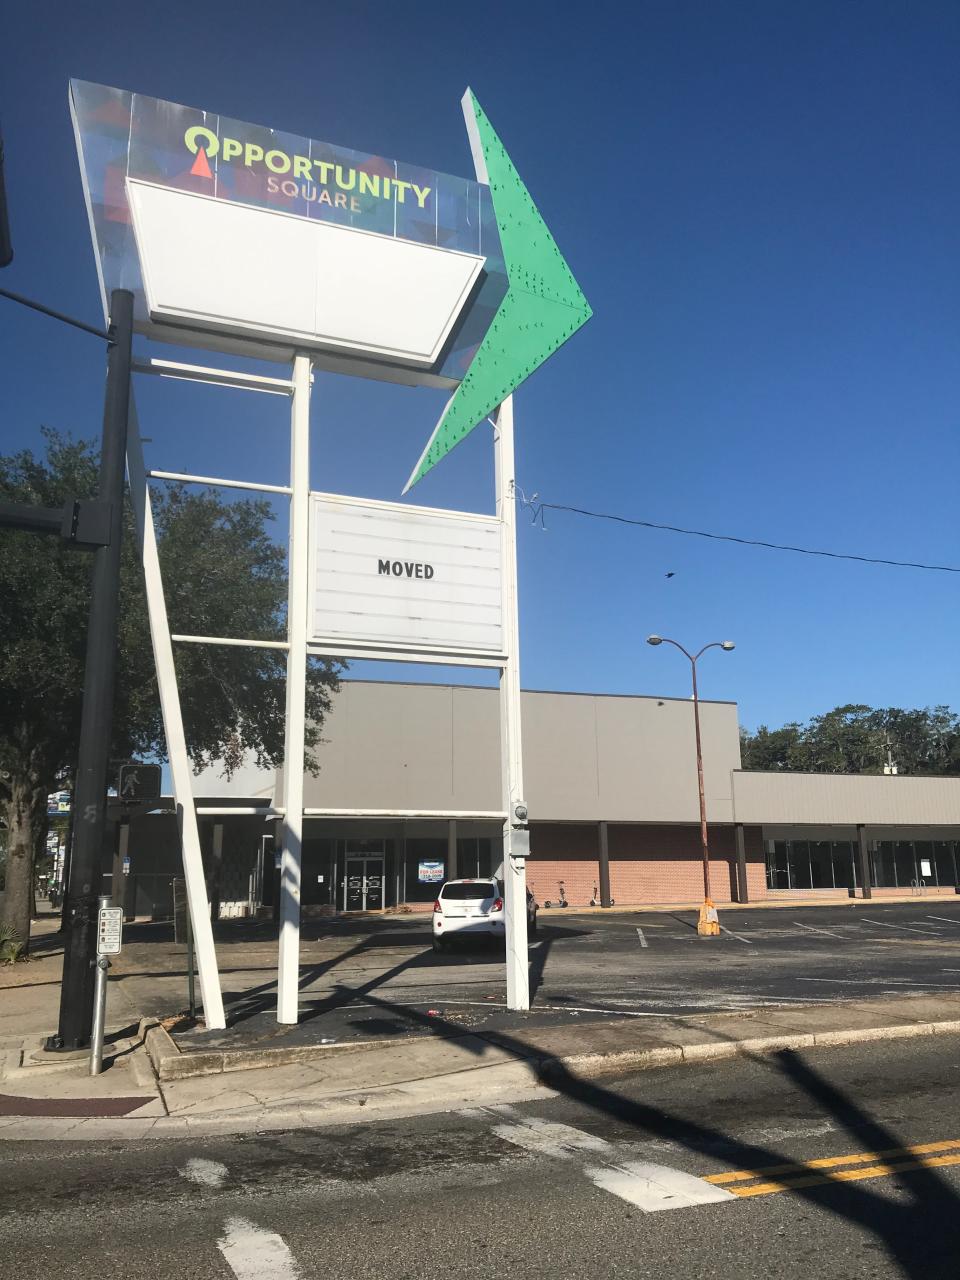 Opportunity Square, at the intersection of University Avenue and Northwest Sixth Street, is one of several strip malls in Gainesville that are ripe for redevelopment.